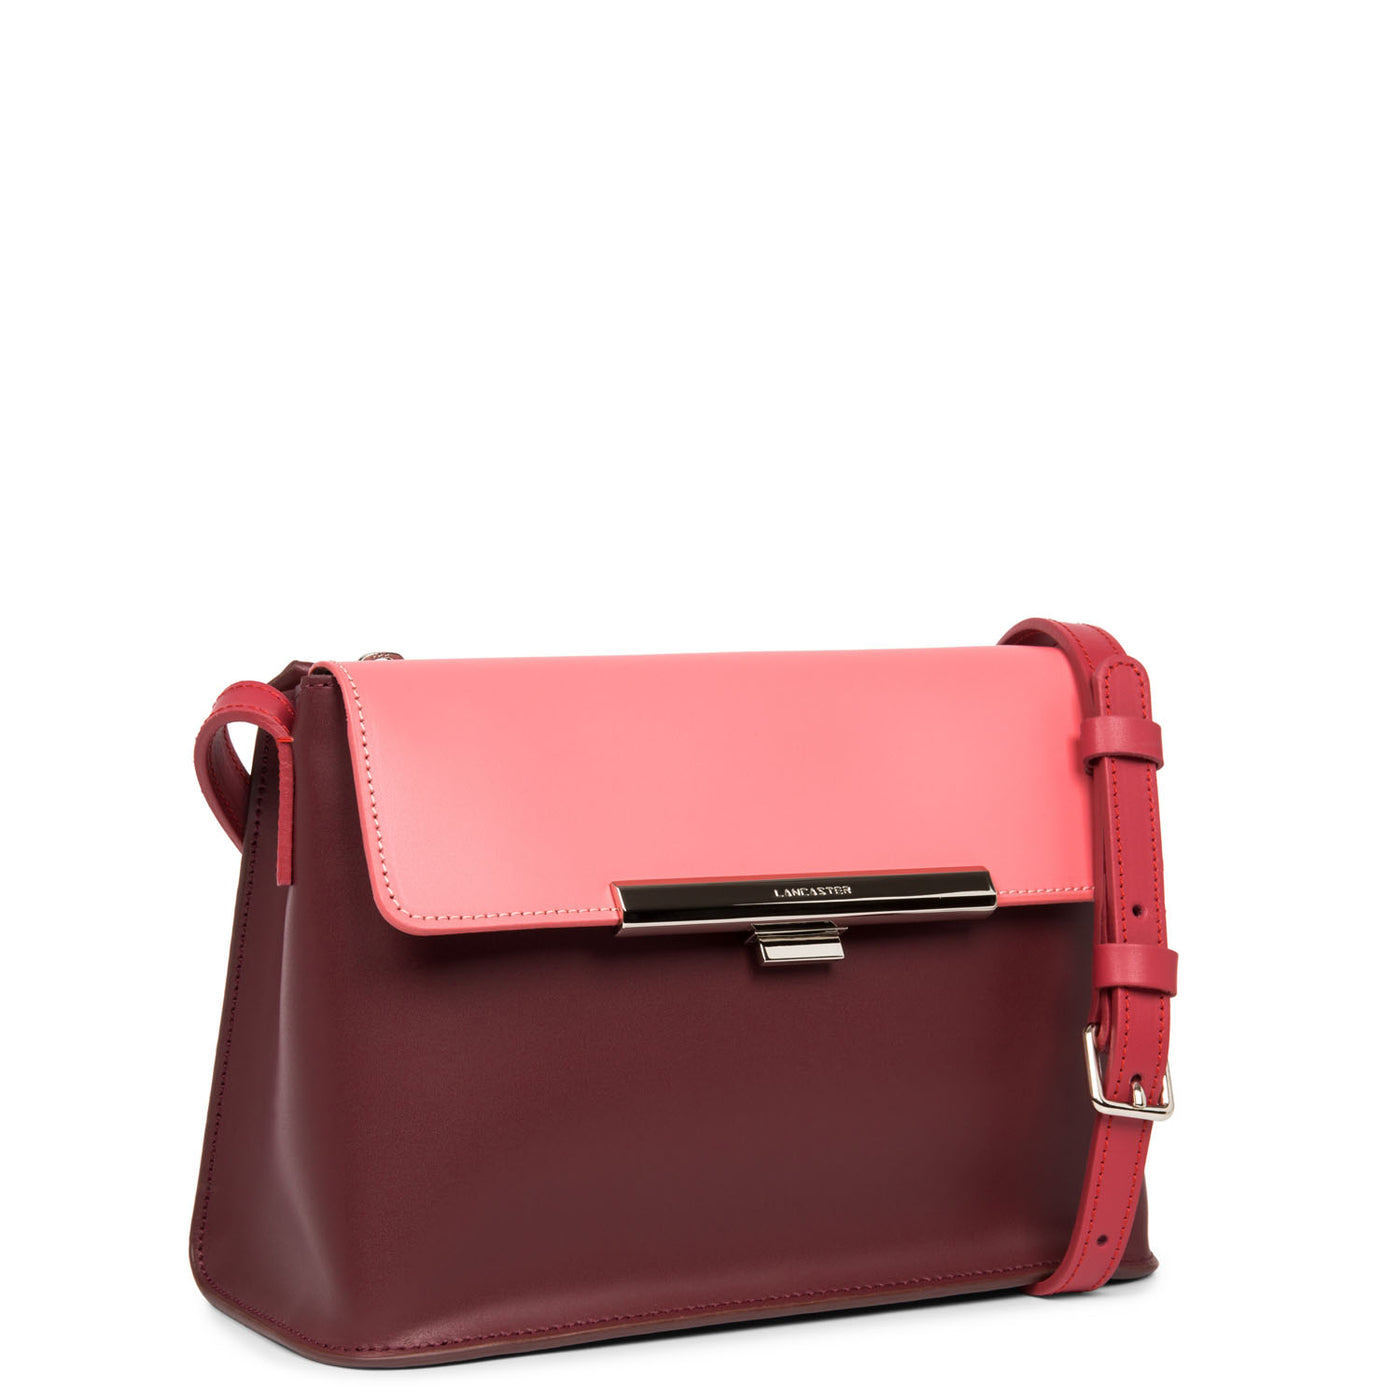 sac trotteur - smooth lily #couleur_betterave-rose-blush-framboise